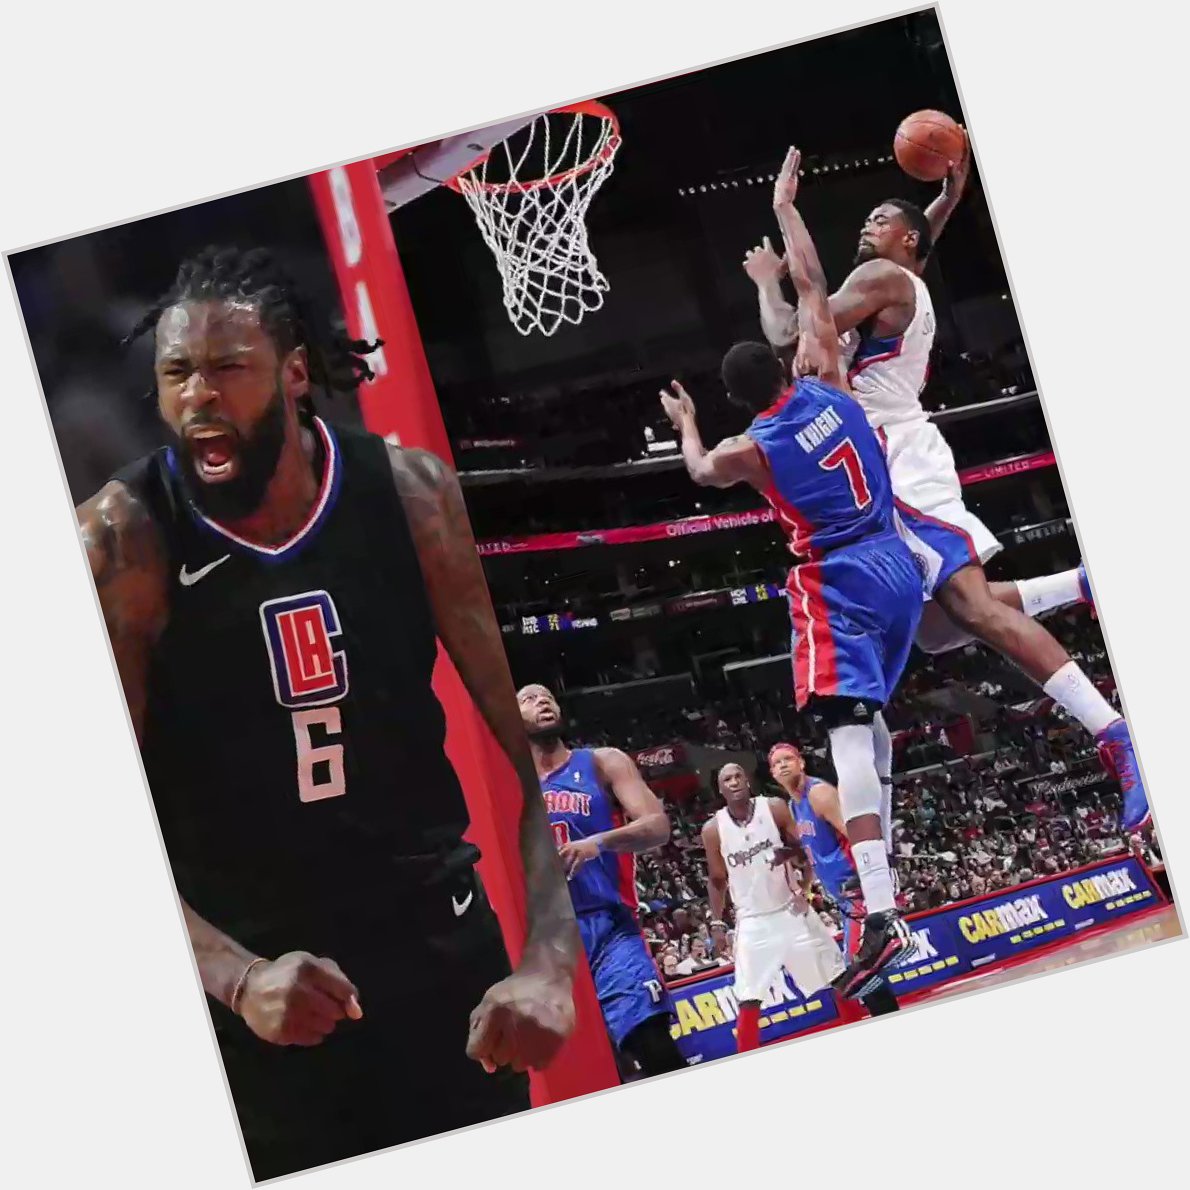 Happy birthday to DeAndre Jordan! One of the best in game dunkers of all time  